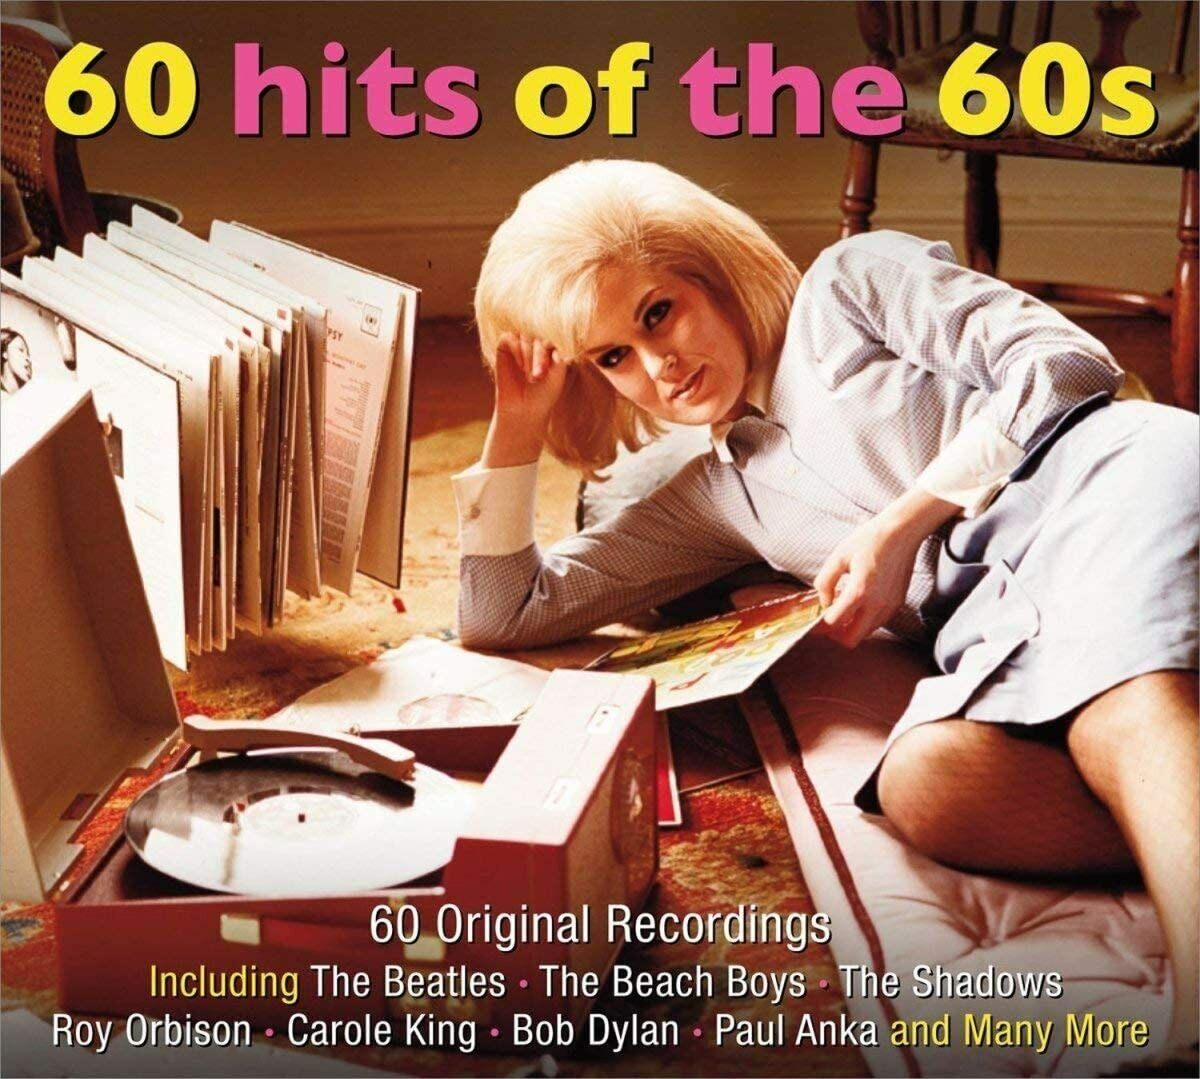 60 Hits Of The 60s 3-CD NEW SEALED Beatles/Beach Boys/Dion/Crystals/Roy Orbison+